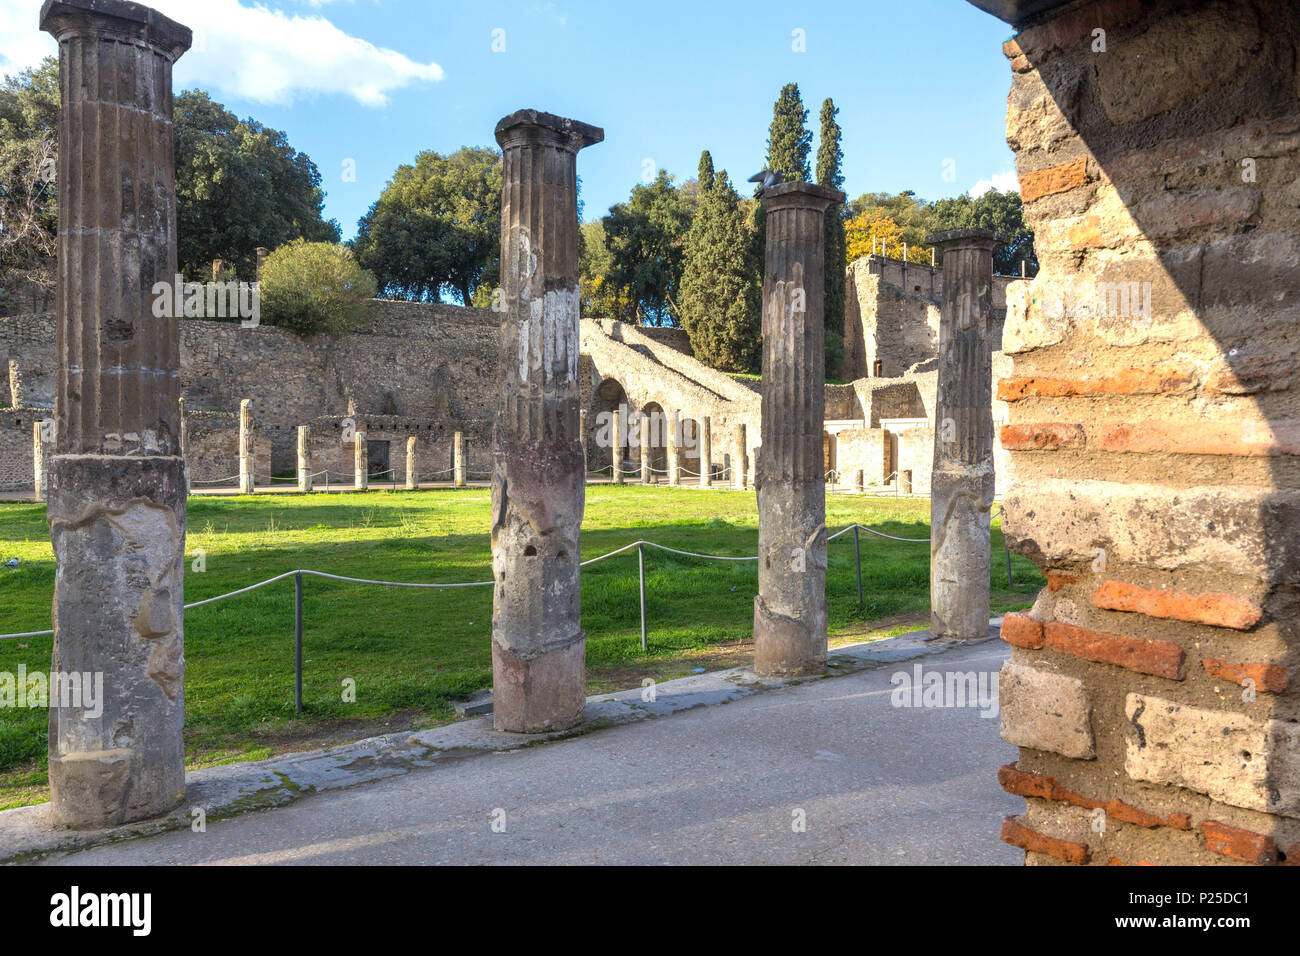 Arcade of Theaters or Gladiator Barracks in Ancient Pompei village, Naples district, Campania, Italy Stock Photo